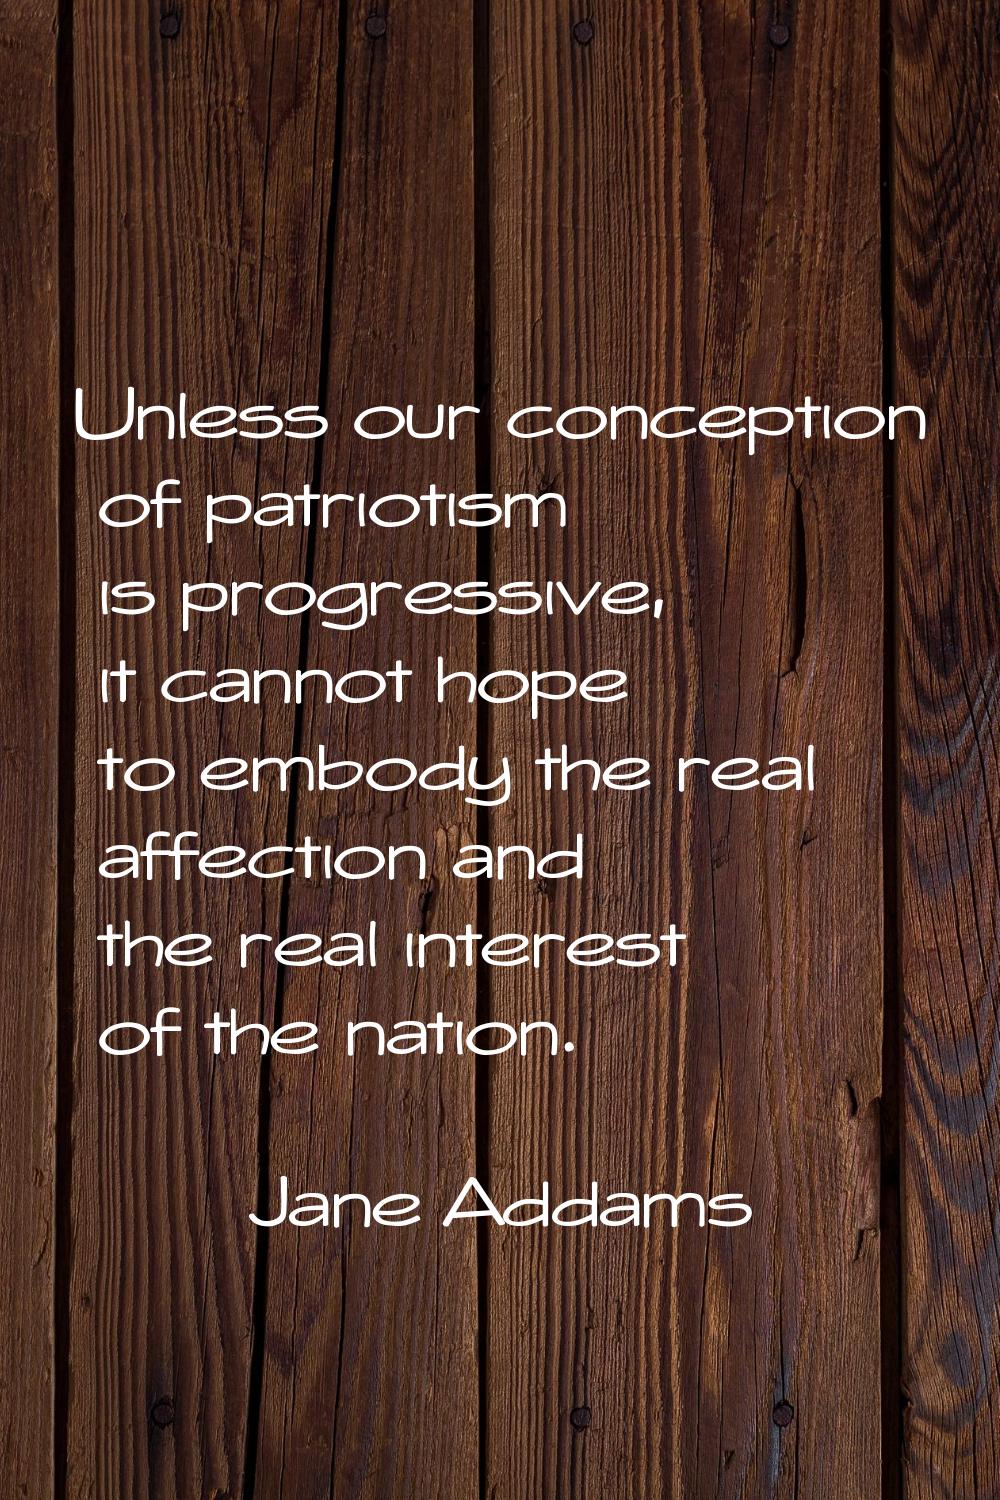 Unless our conception of patriotism is progressive, it cannot hope to embody the real affection and